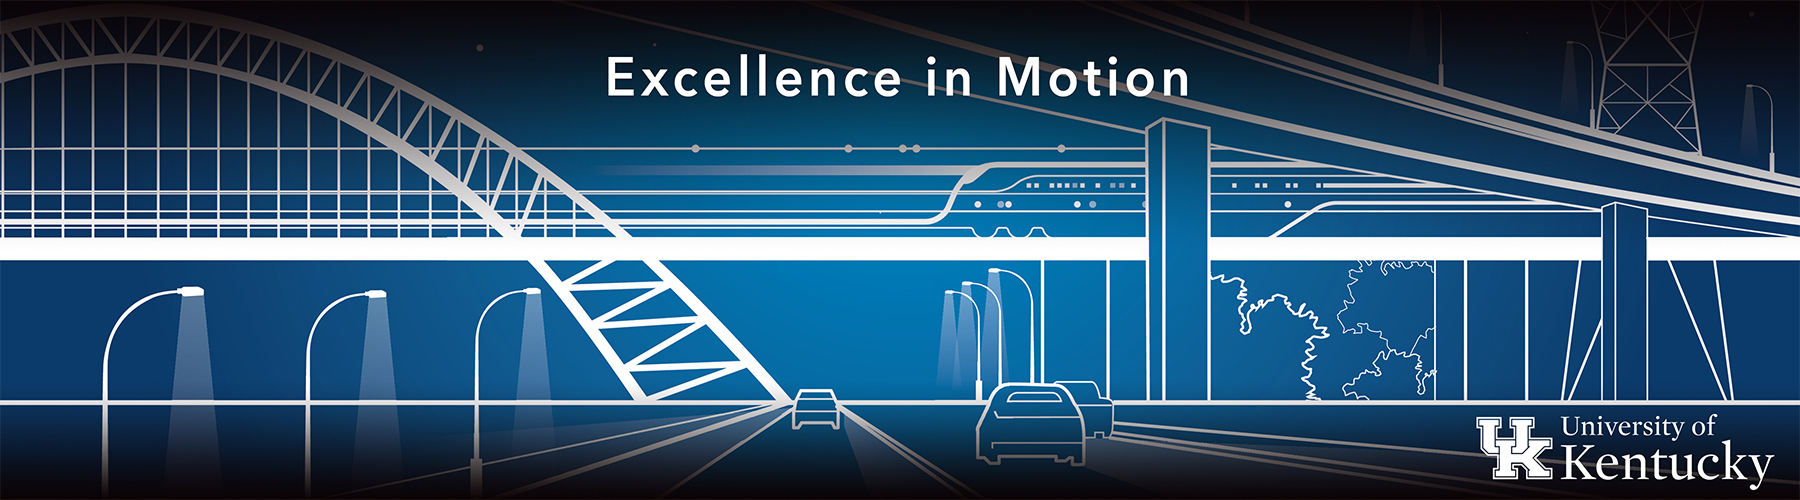 Excellence in Motion Graphic - Kentucky Transportation Center